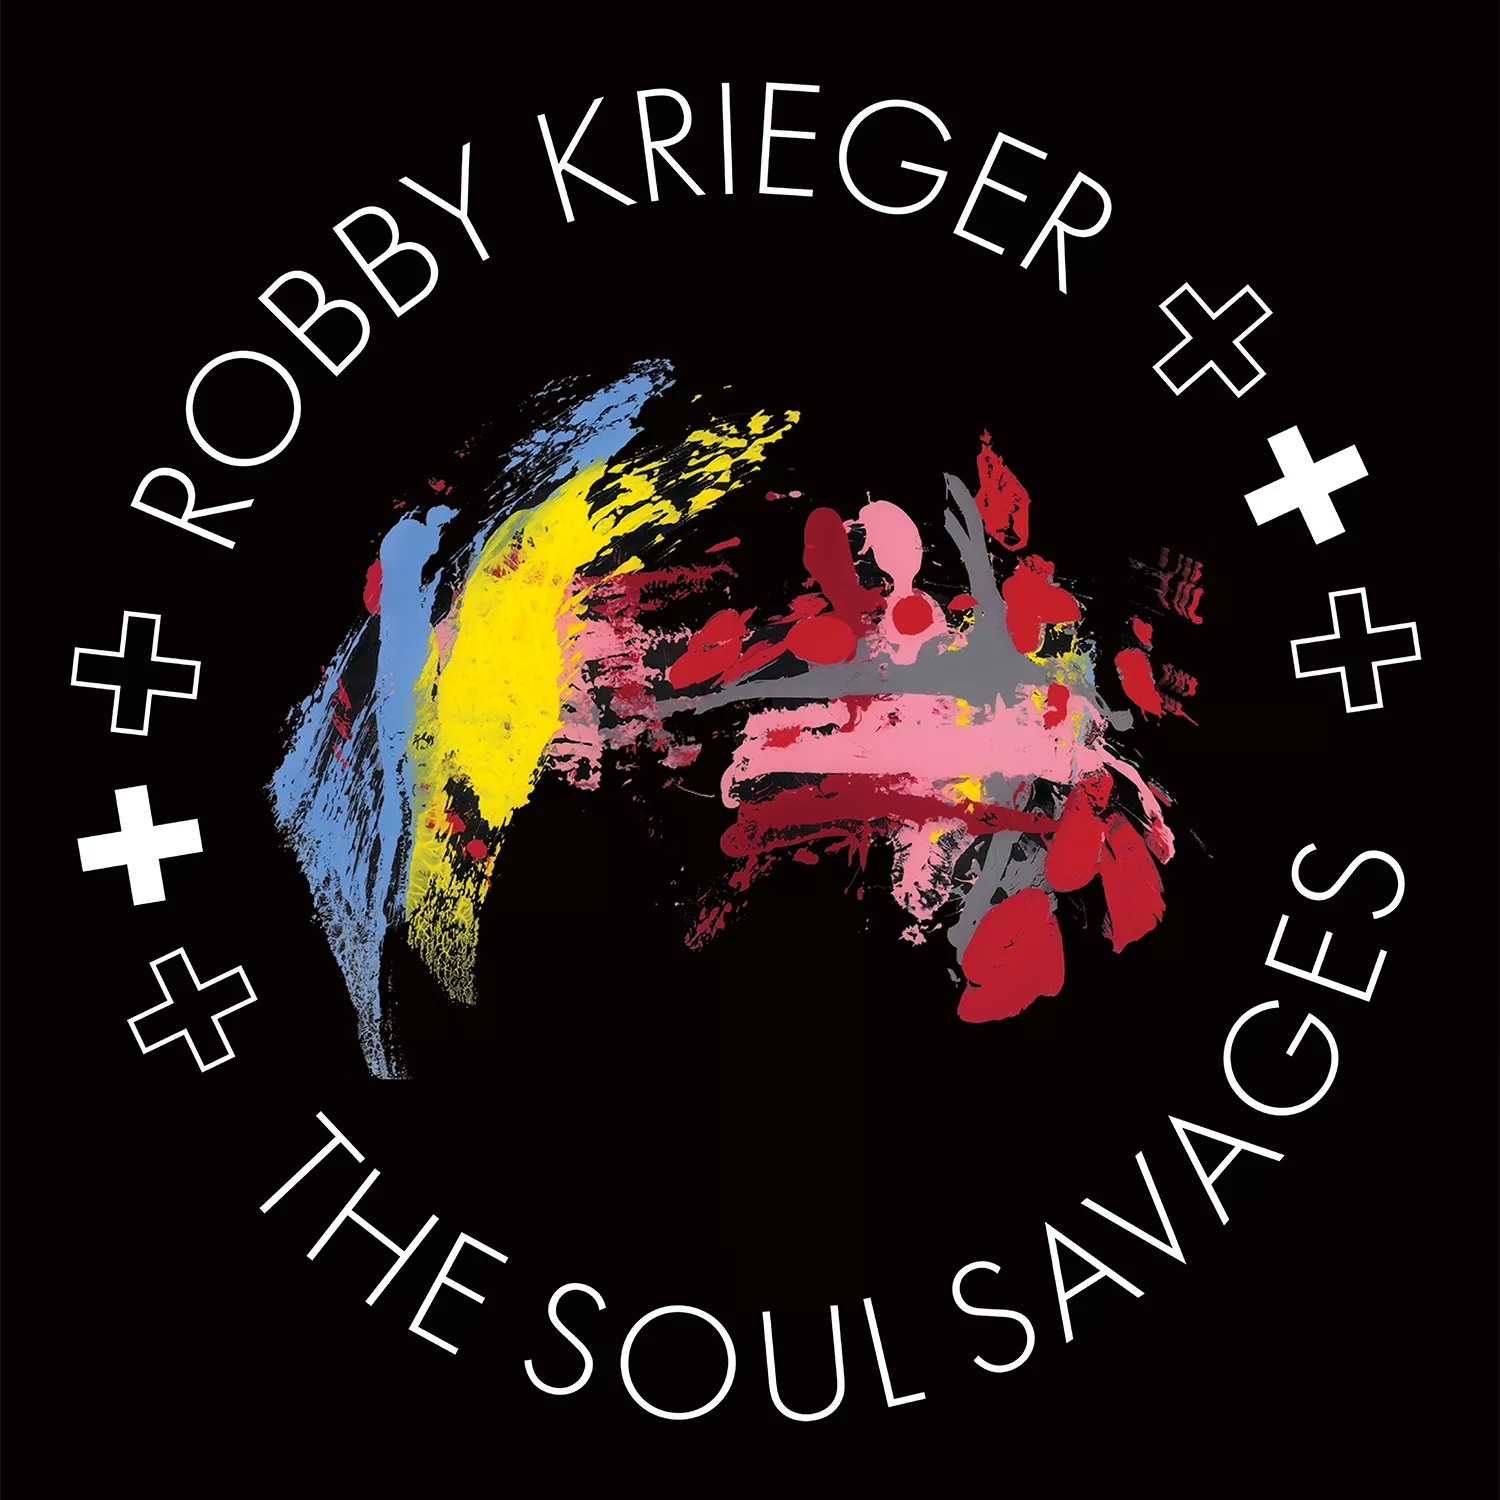 Robby Krieger & The Soul Savages - Robby Krieger & The Soul Savages